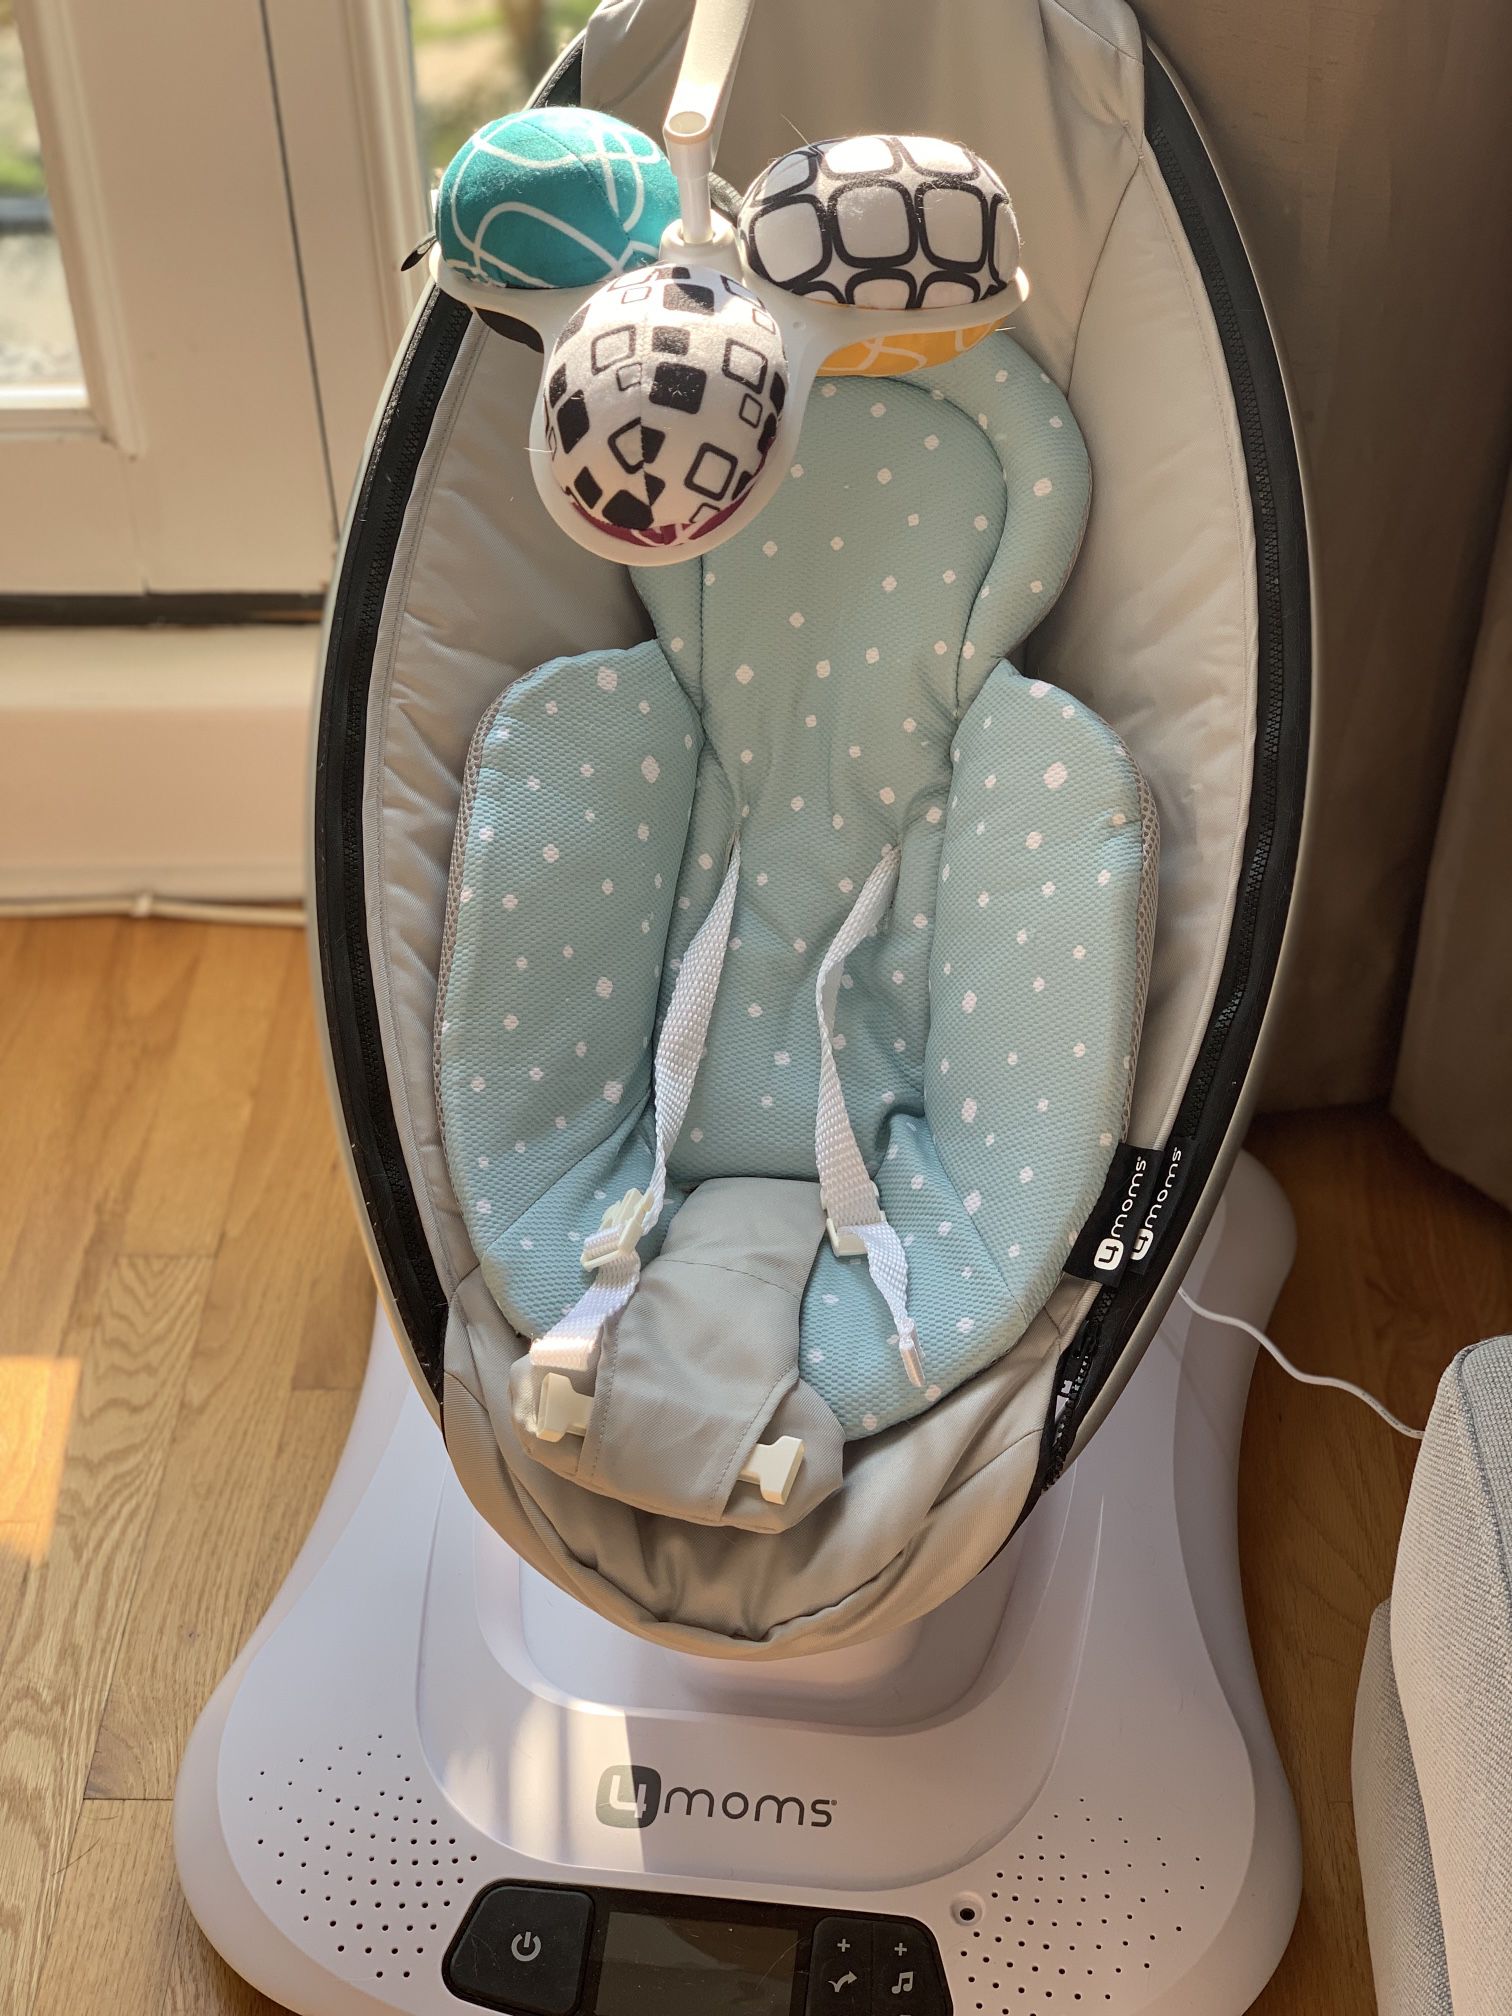  4moms mamaRoo 4 5 Unique Motions Bluetooth Enabled Baby Swing - Gray Classic